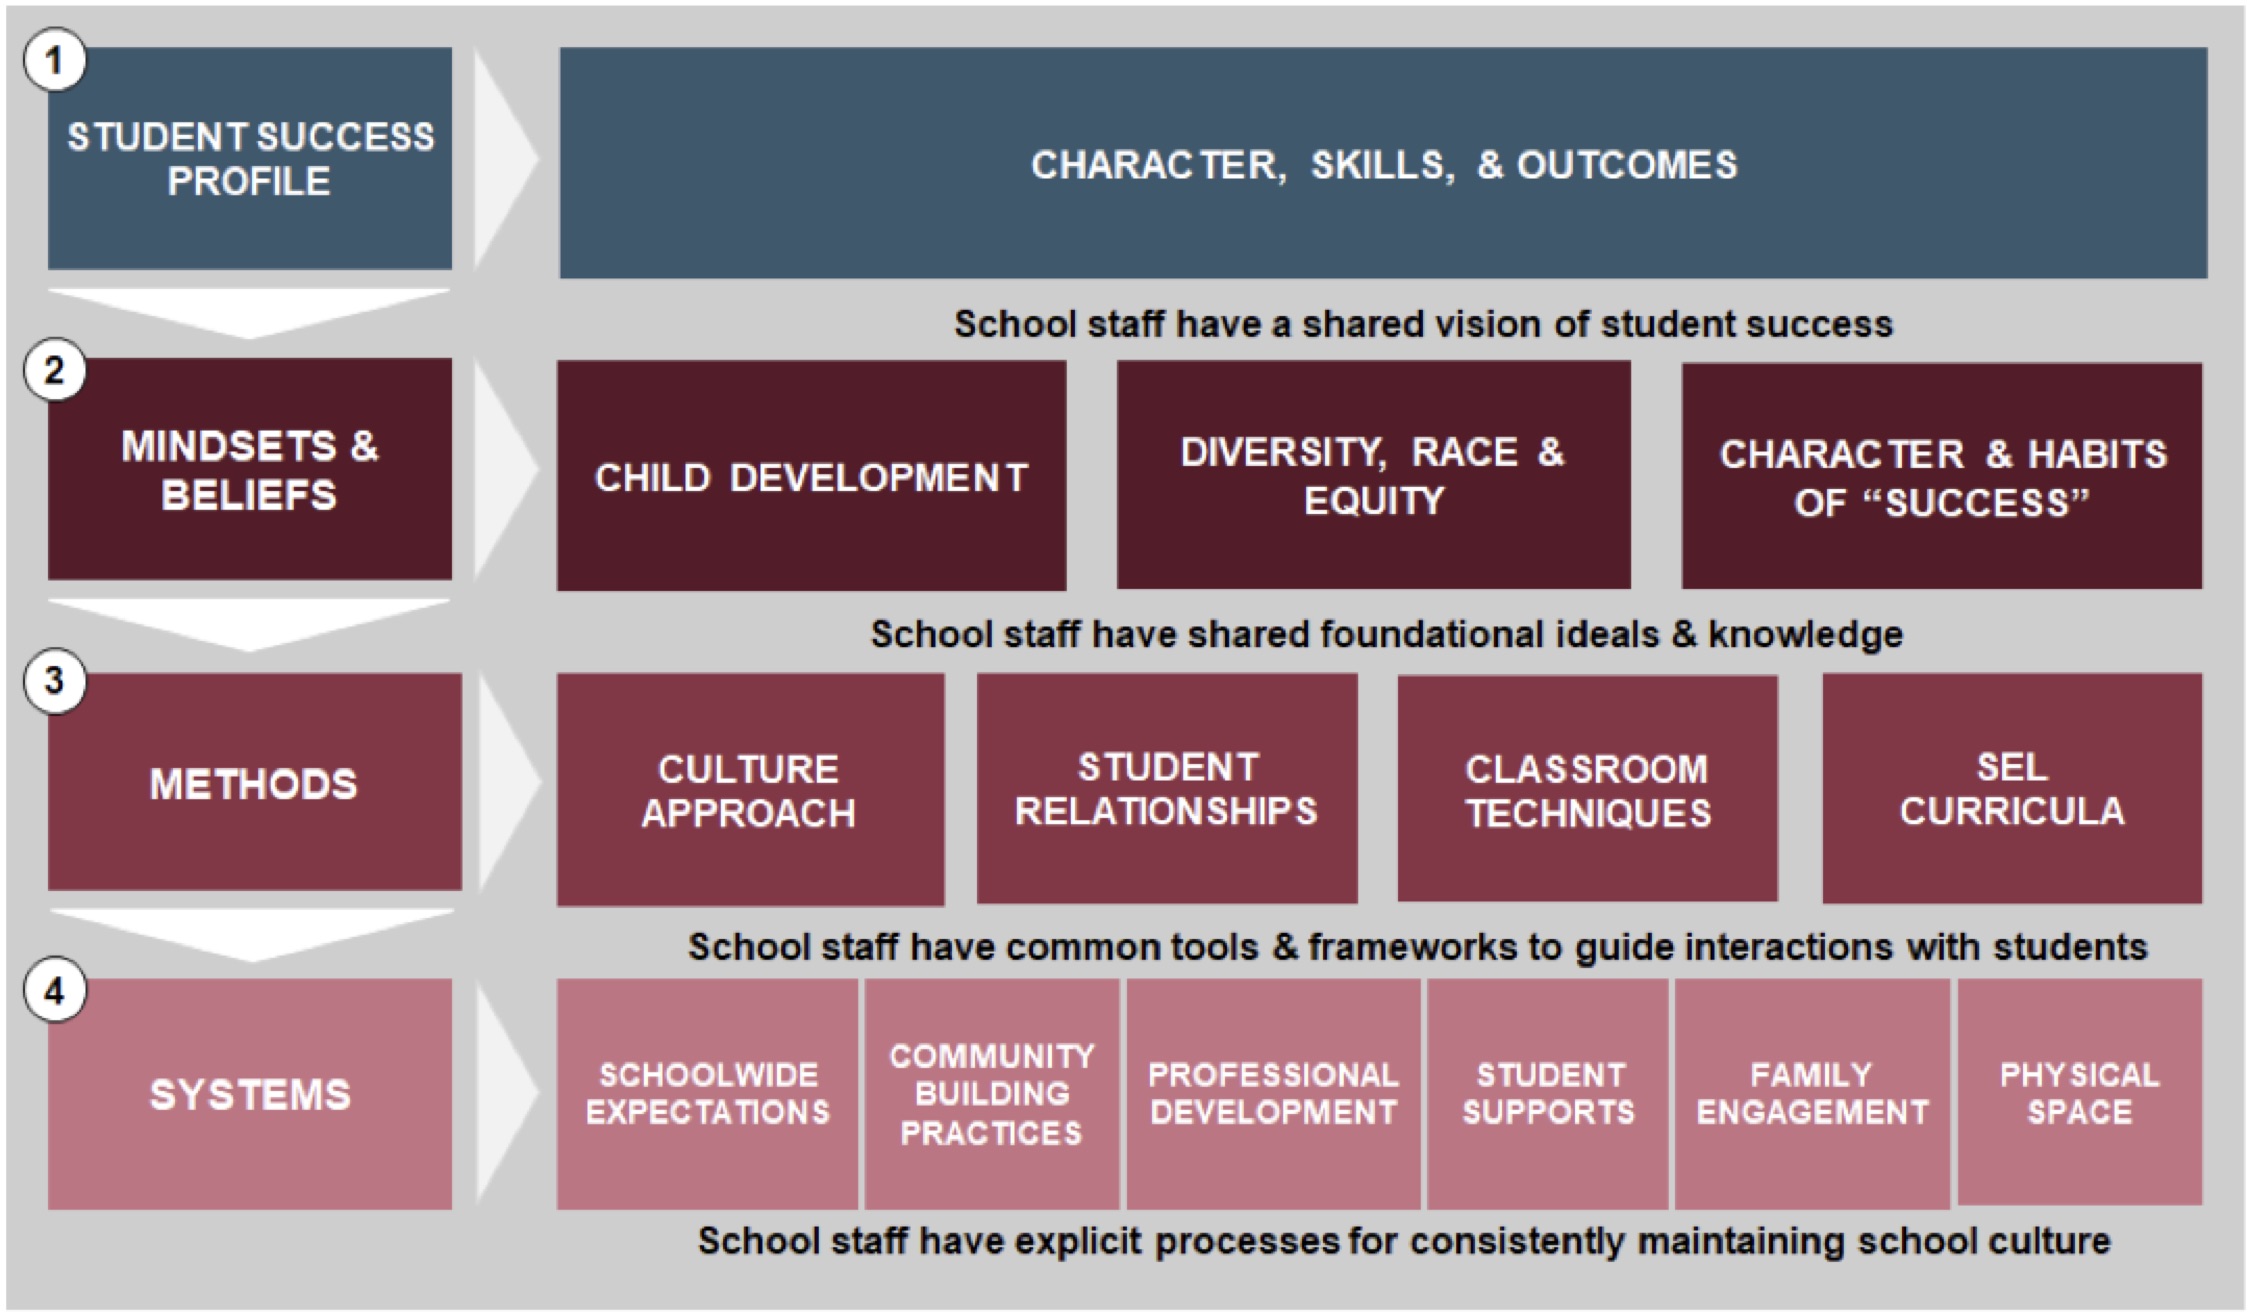 Organizing framework for the four elements of school culture, as defined by Tresha Ward of Bellwether Education Partners